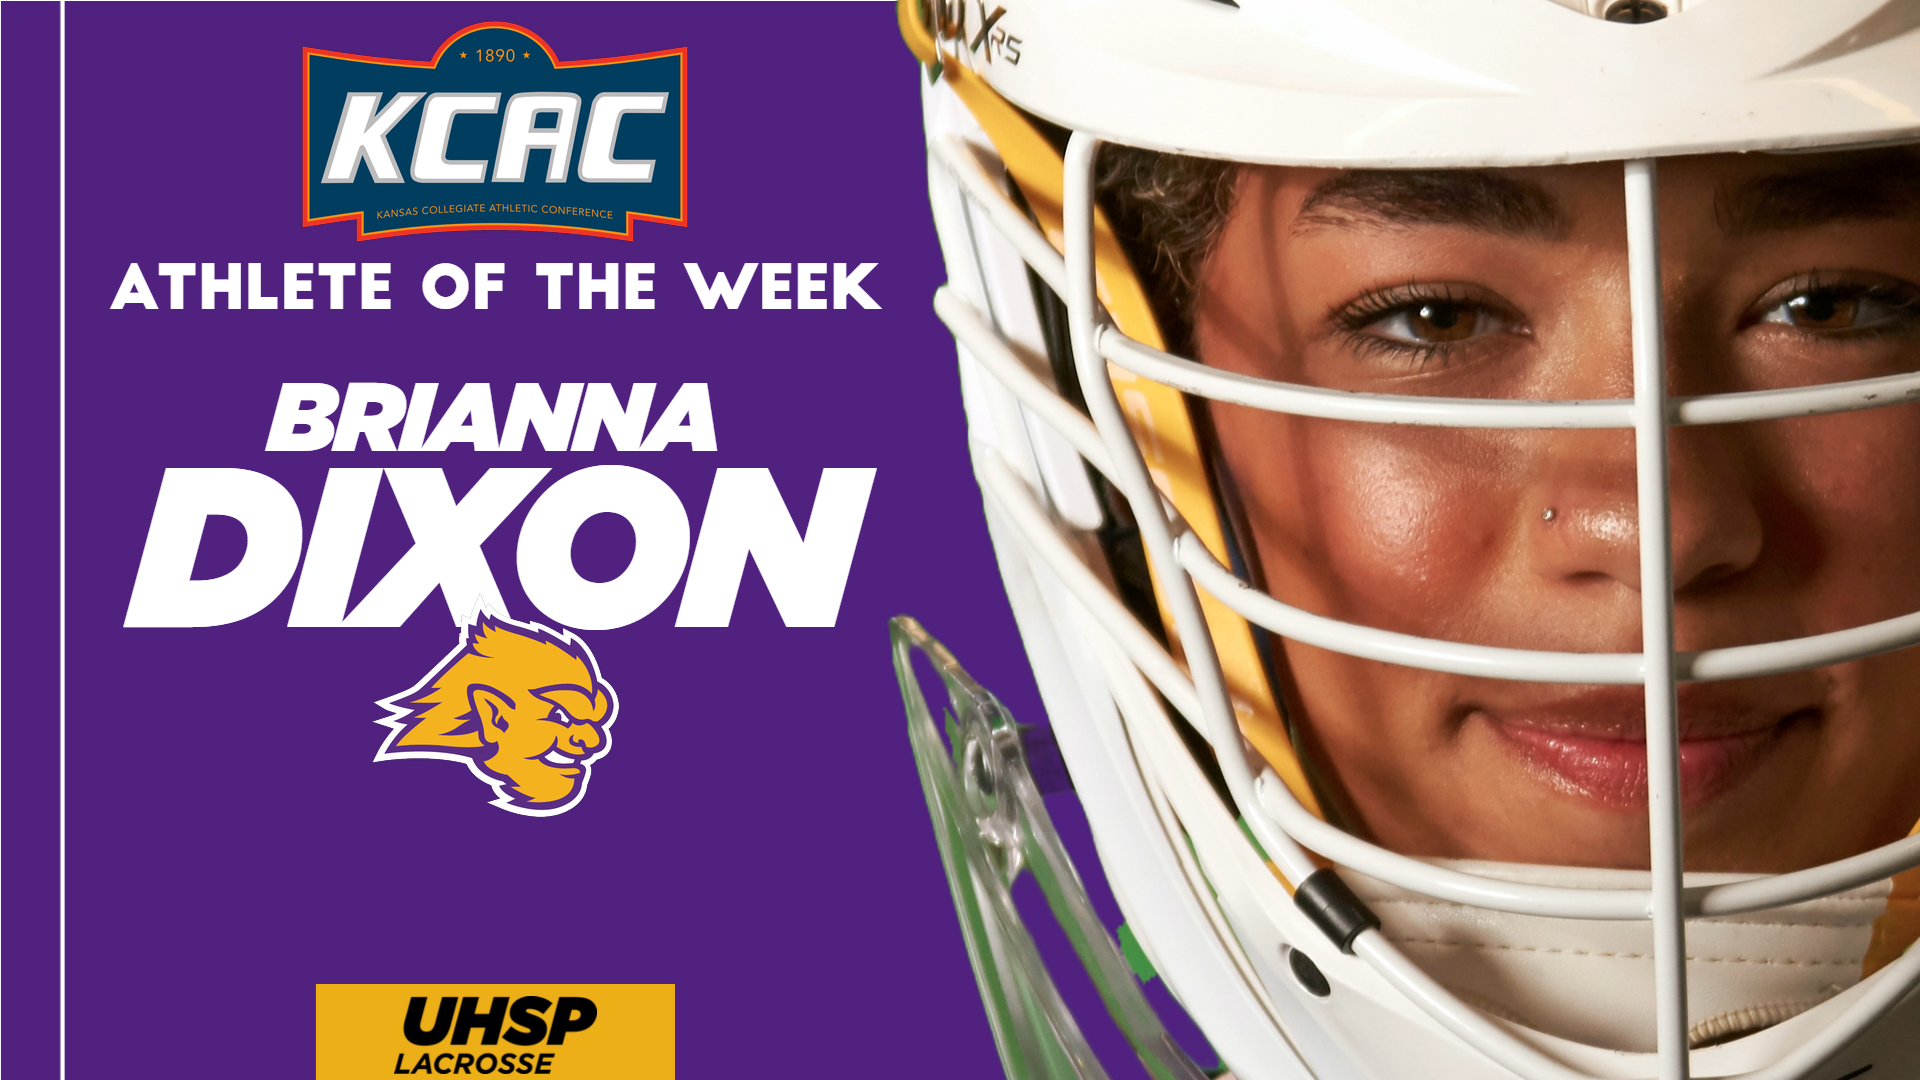 Career day lands Dixon Player of the Week honors